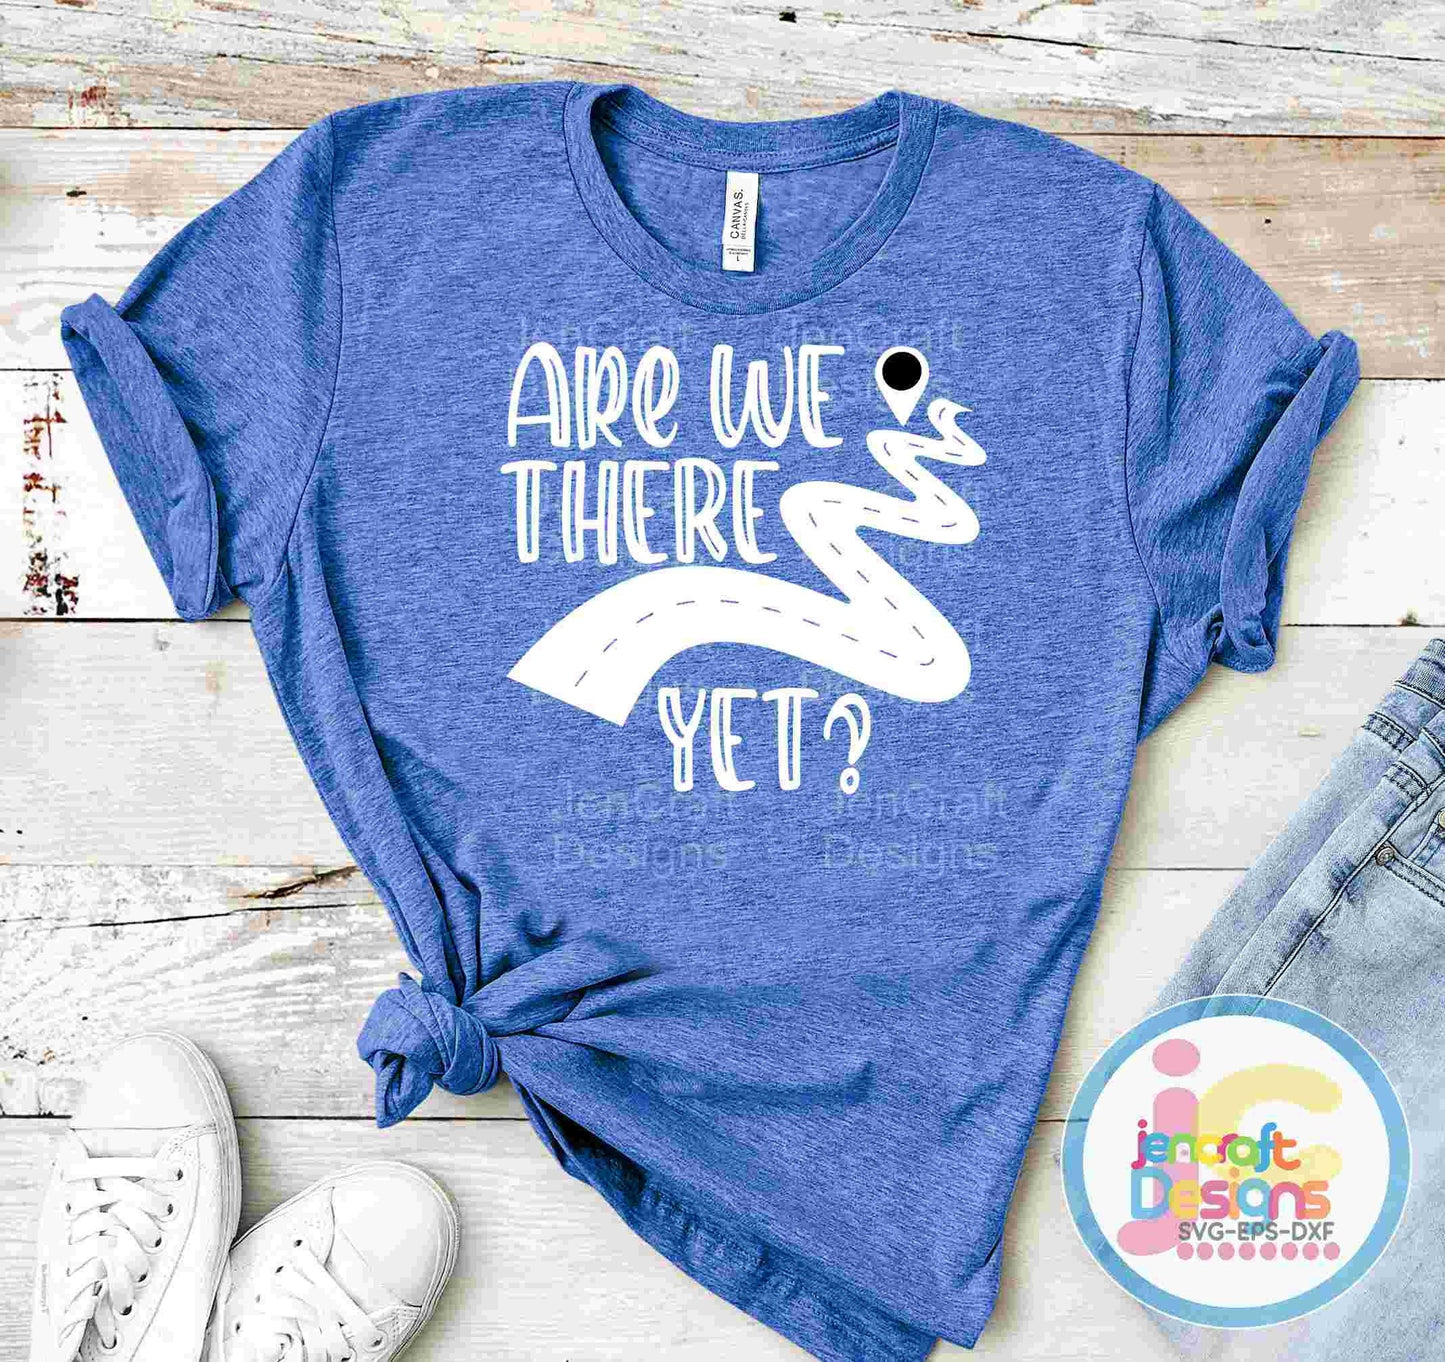 Are we there yet Road Trip Svg Eps Dxf Png Cut File - JenCraft Designs